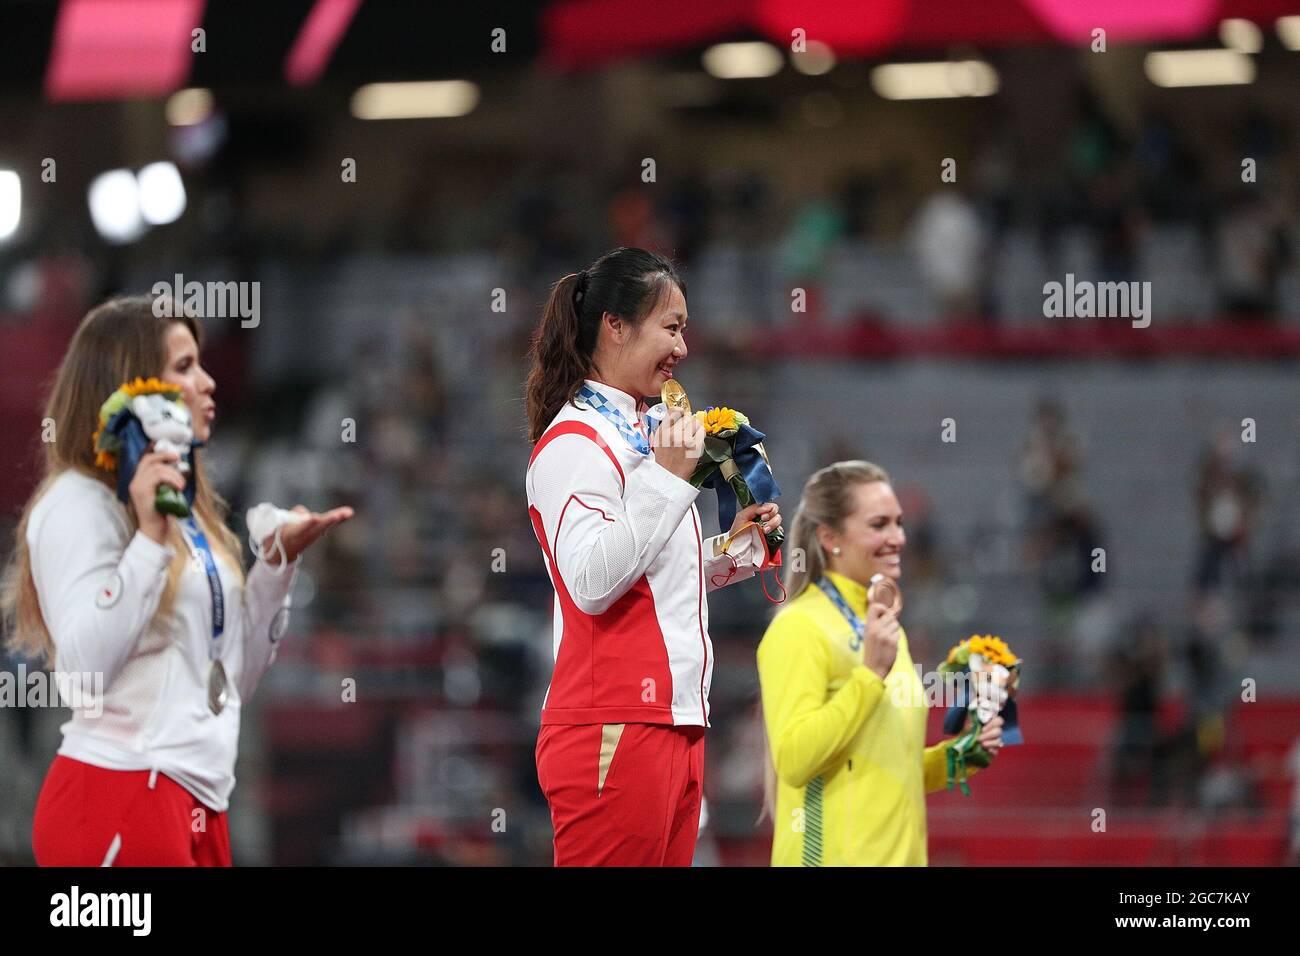 Tokyo, Japan. 7th Aug, 2021. Gold medalist Liu Shiying (C) of China, silver medalist Maria Andrejczyk (L) of Poland and bronze medalist Kelsey-Lee Barber of Australia react during the awarding ceremony of the Women's Javelin Throw at the Tokyo 2020 Olympic Games in Tokyo, Japan, Aug. 7, 2021. Credit: Li Ming/Xinhua/Alamy Live News Stock Photo